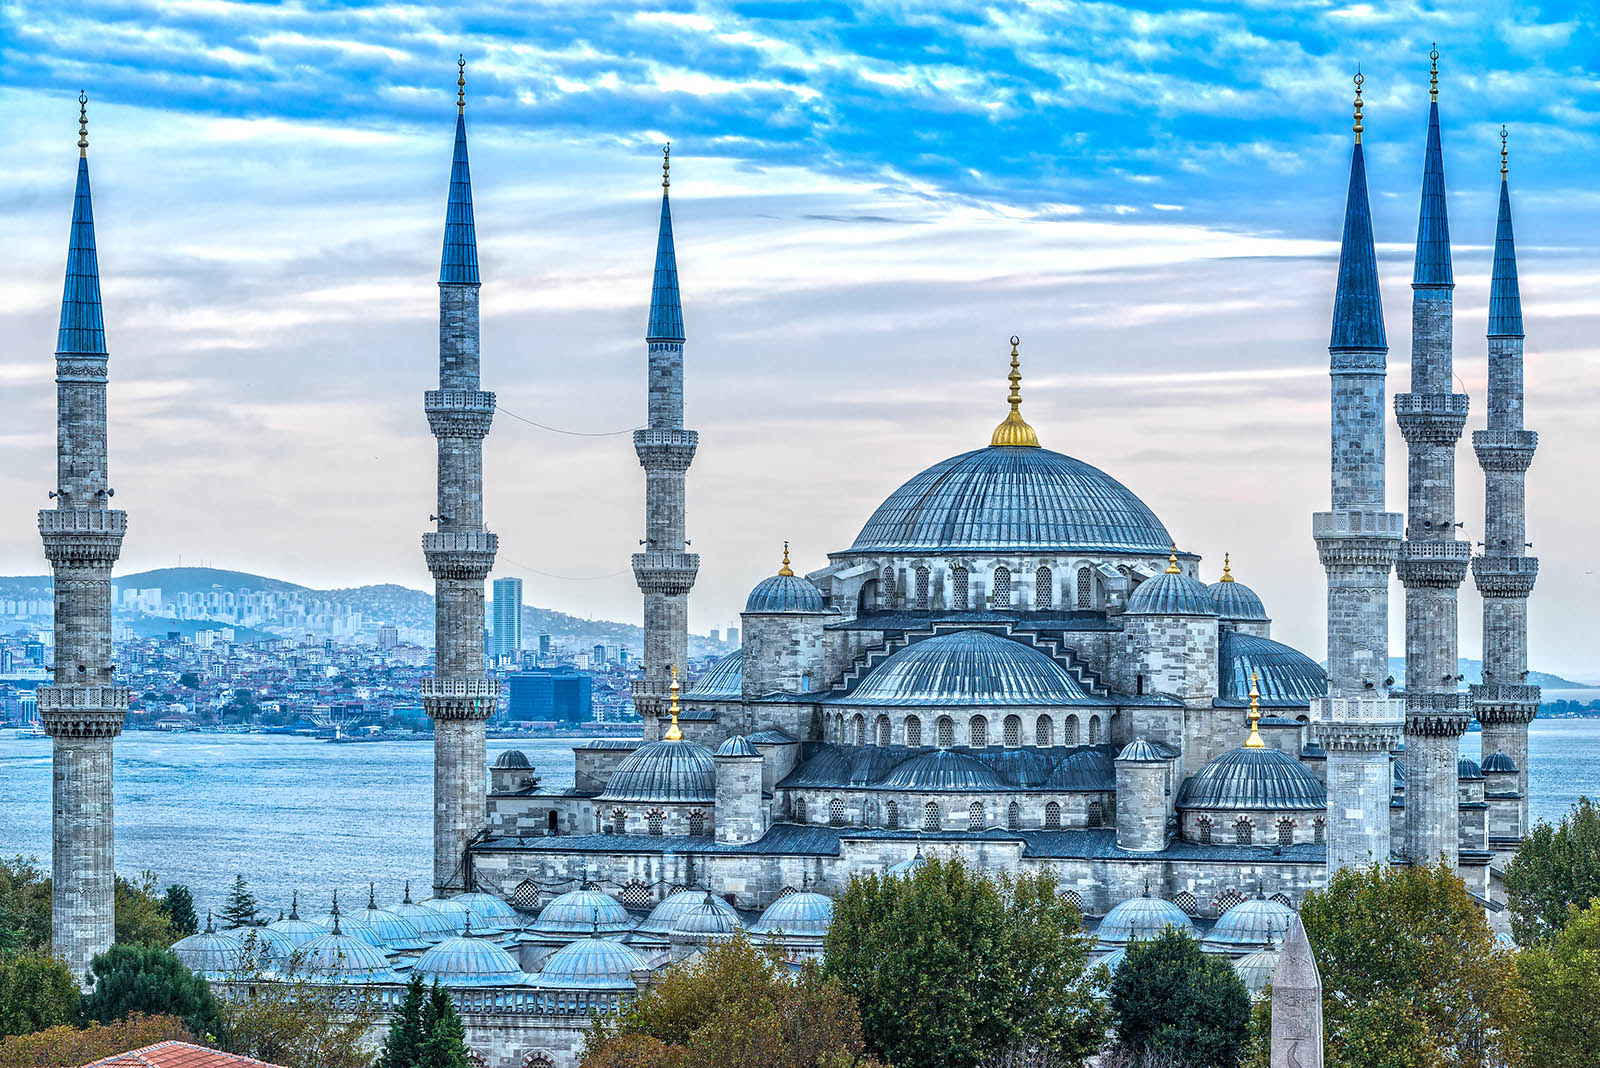 If You Can Name Just 12/20 Countries by Their Famous Landmark, I’ll Be Really Impressed Blue Mosque In Istanbul, Turkey